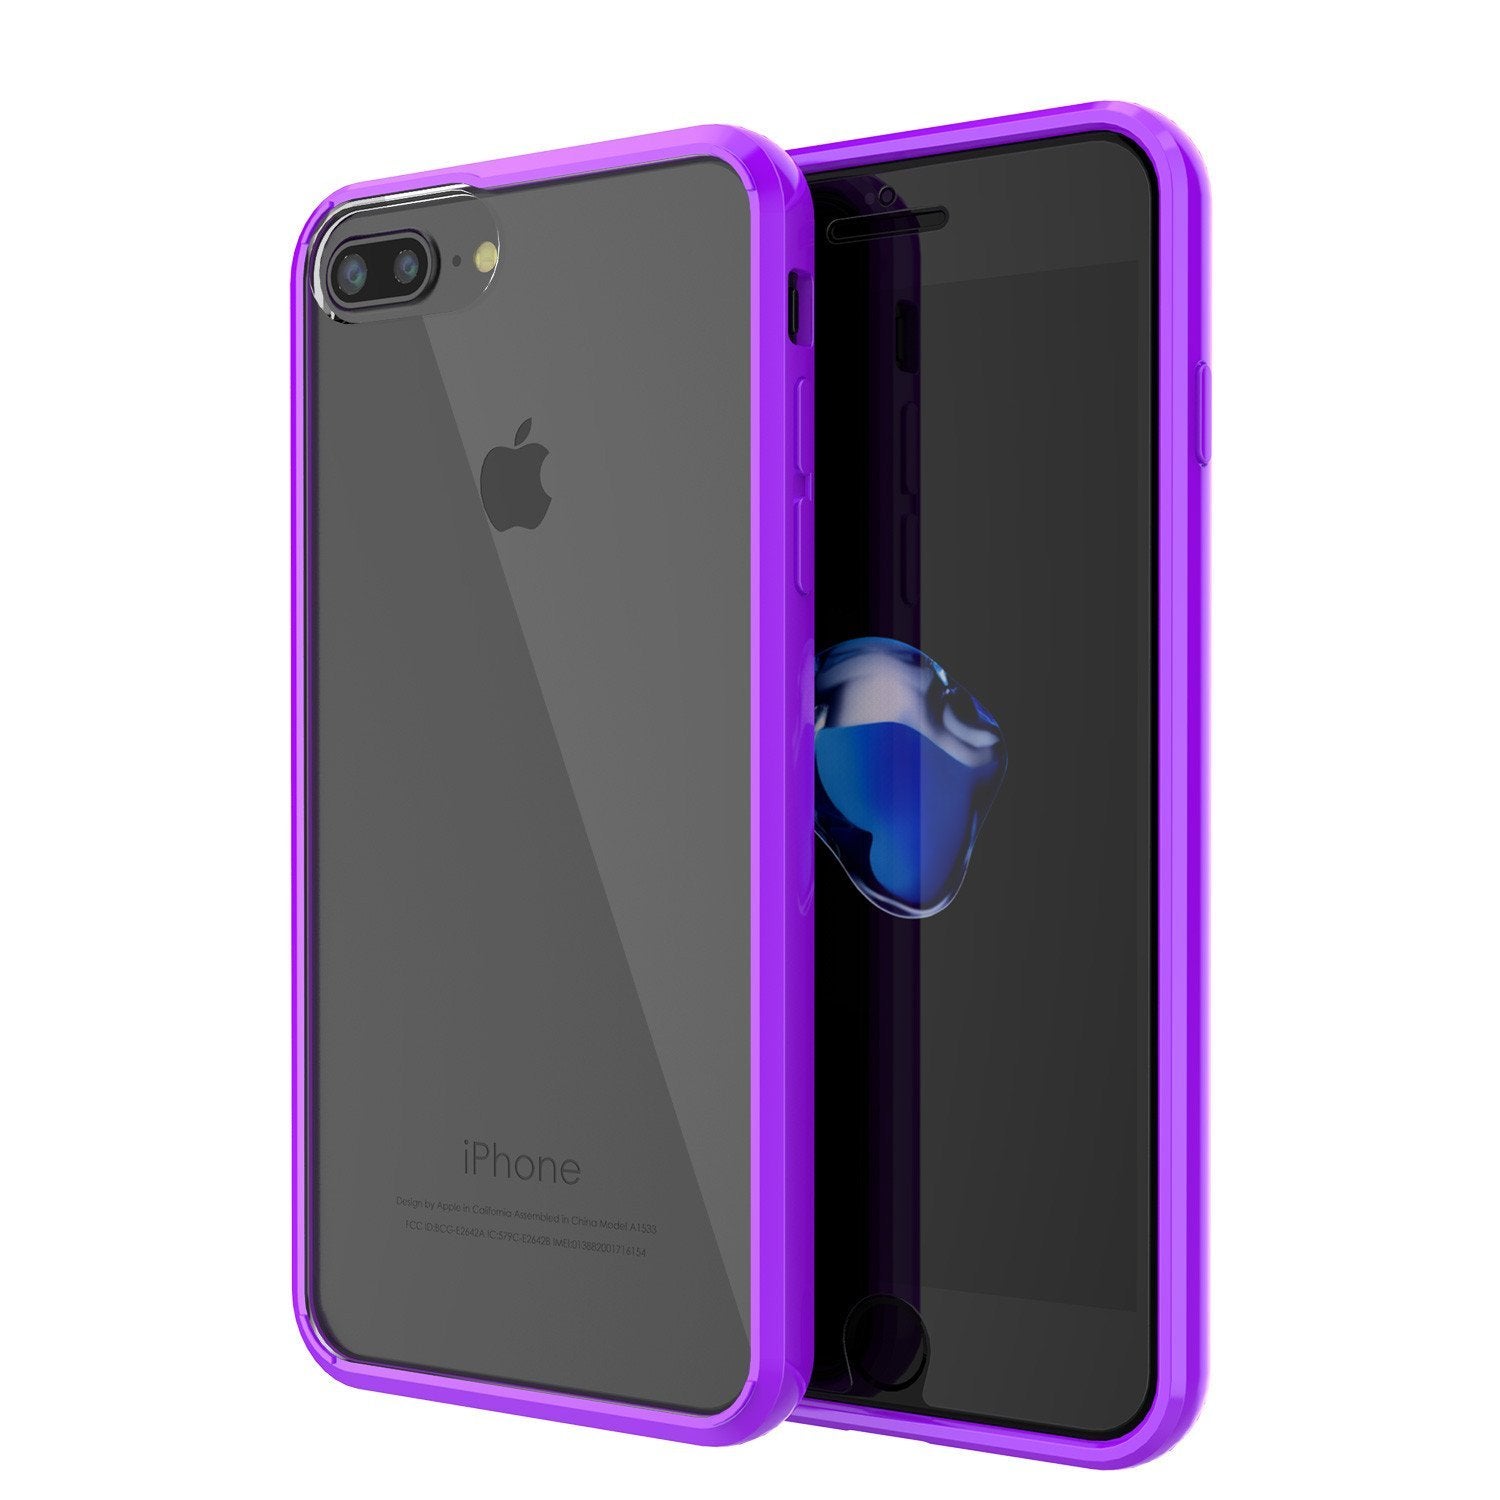 iPhone 8 Case Punkcase® LUCID 2.0 Purple Series w/ PUNK SHIELD Screen Protector | Ultra Fit